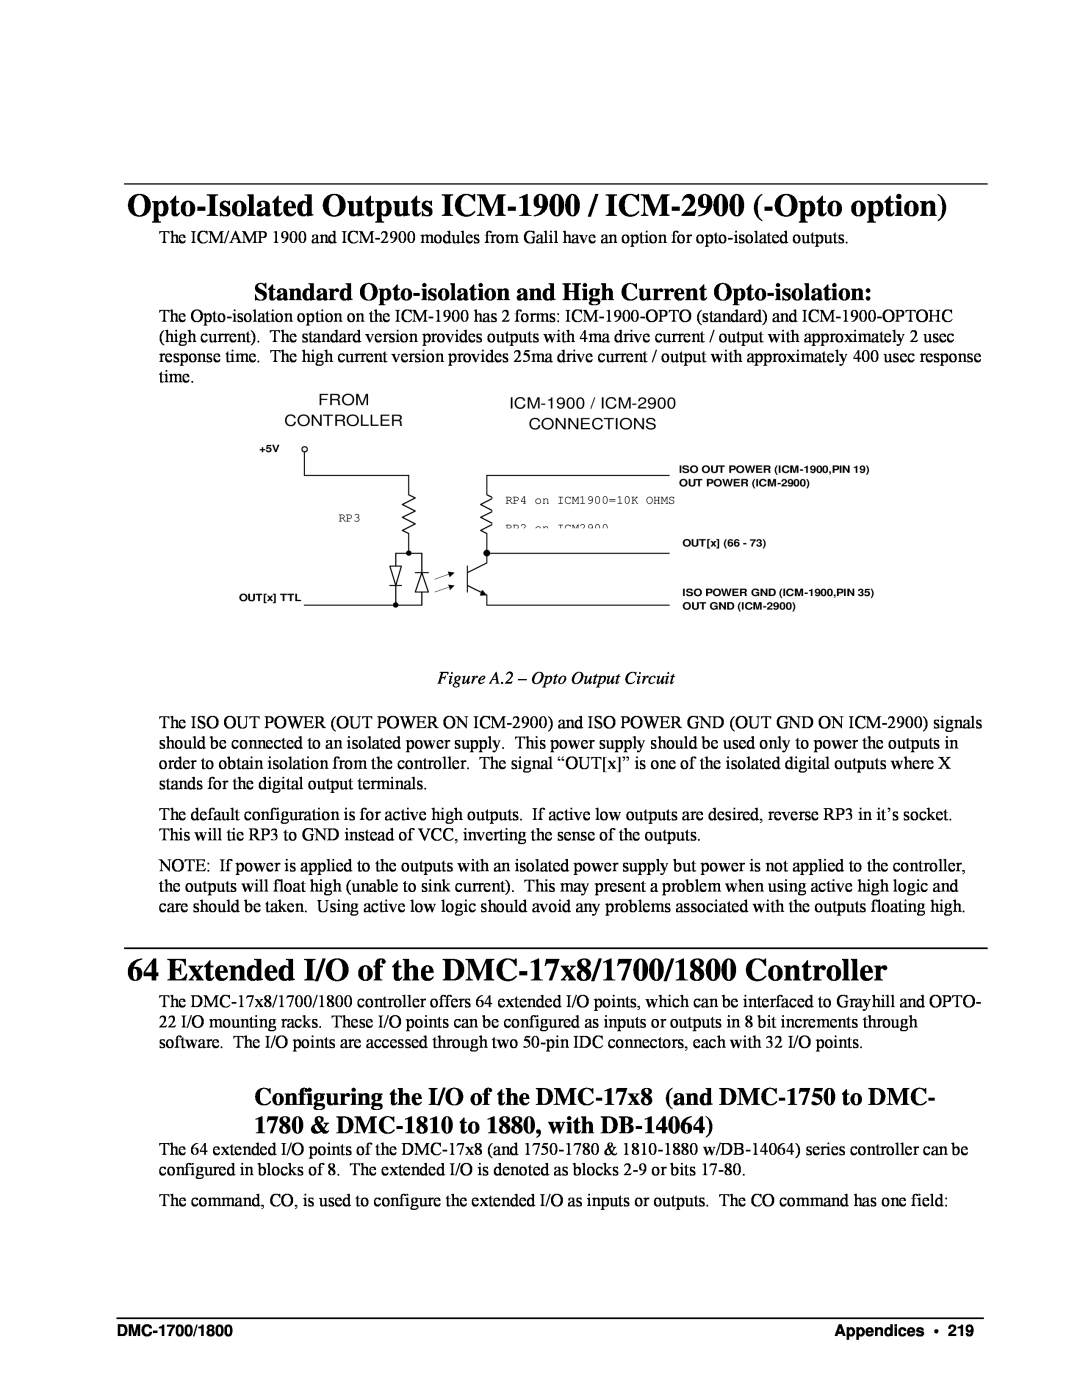 Galil DMC-1700, DMC-1800 user manual Figure A.2 – Opto Output Circuit, From Controller, ICM-1900 / ICM-2900 CONNECTIONS 